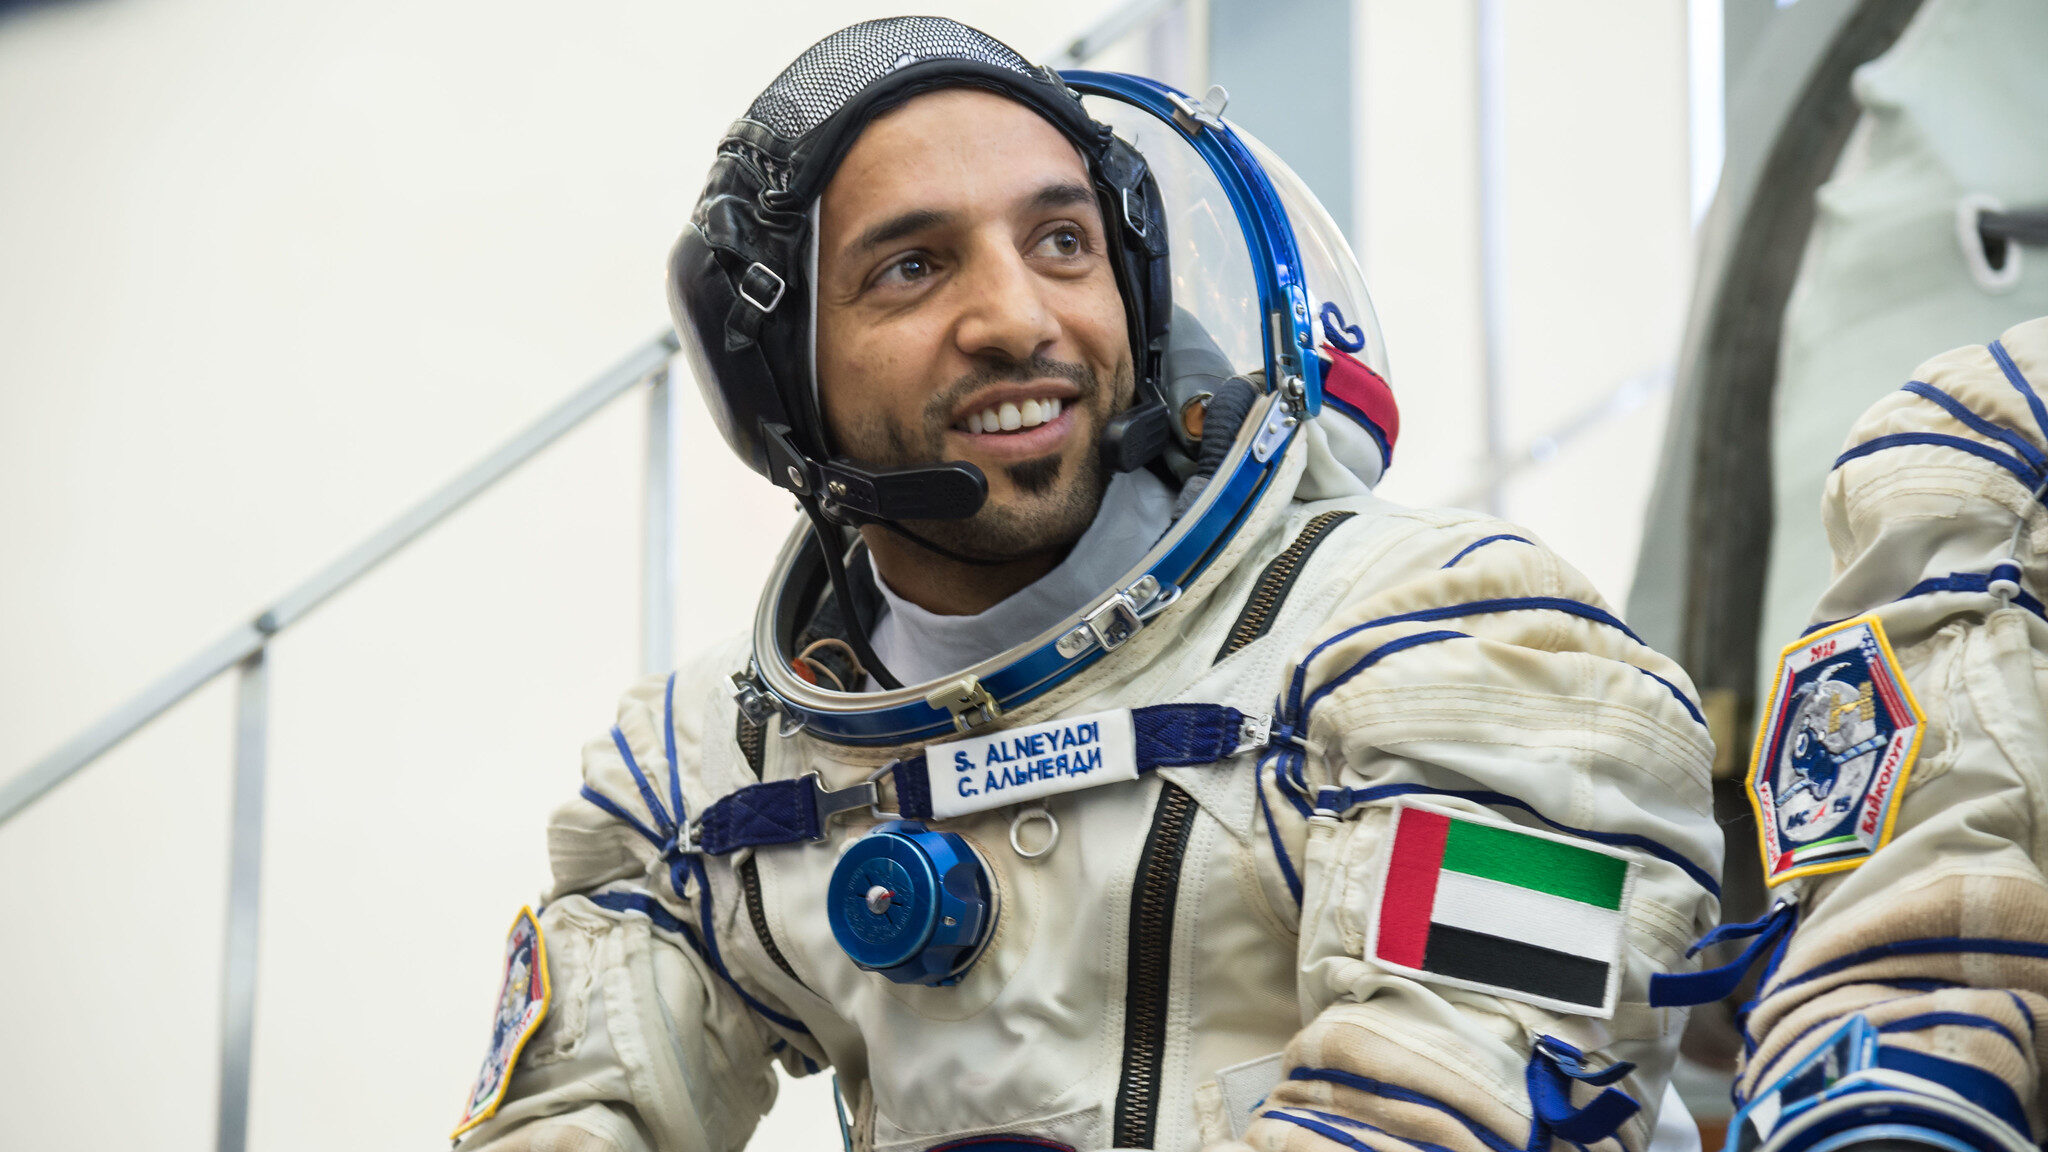 Emirati Astronaut Says He Is Not Required To Fast for Ramadan in Space